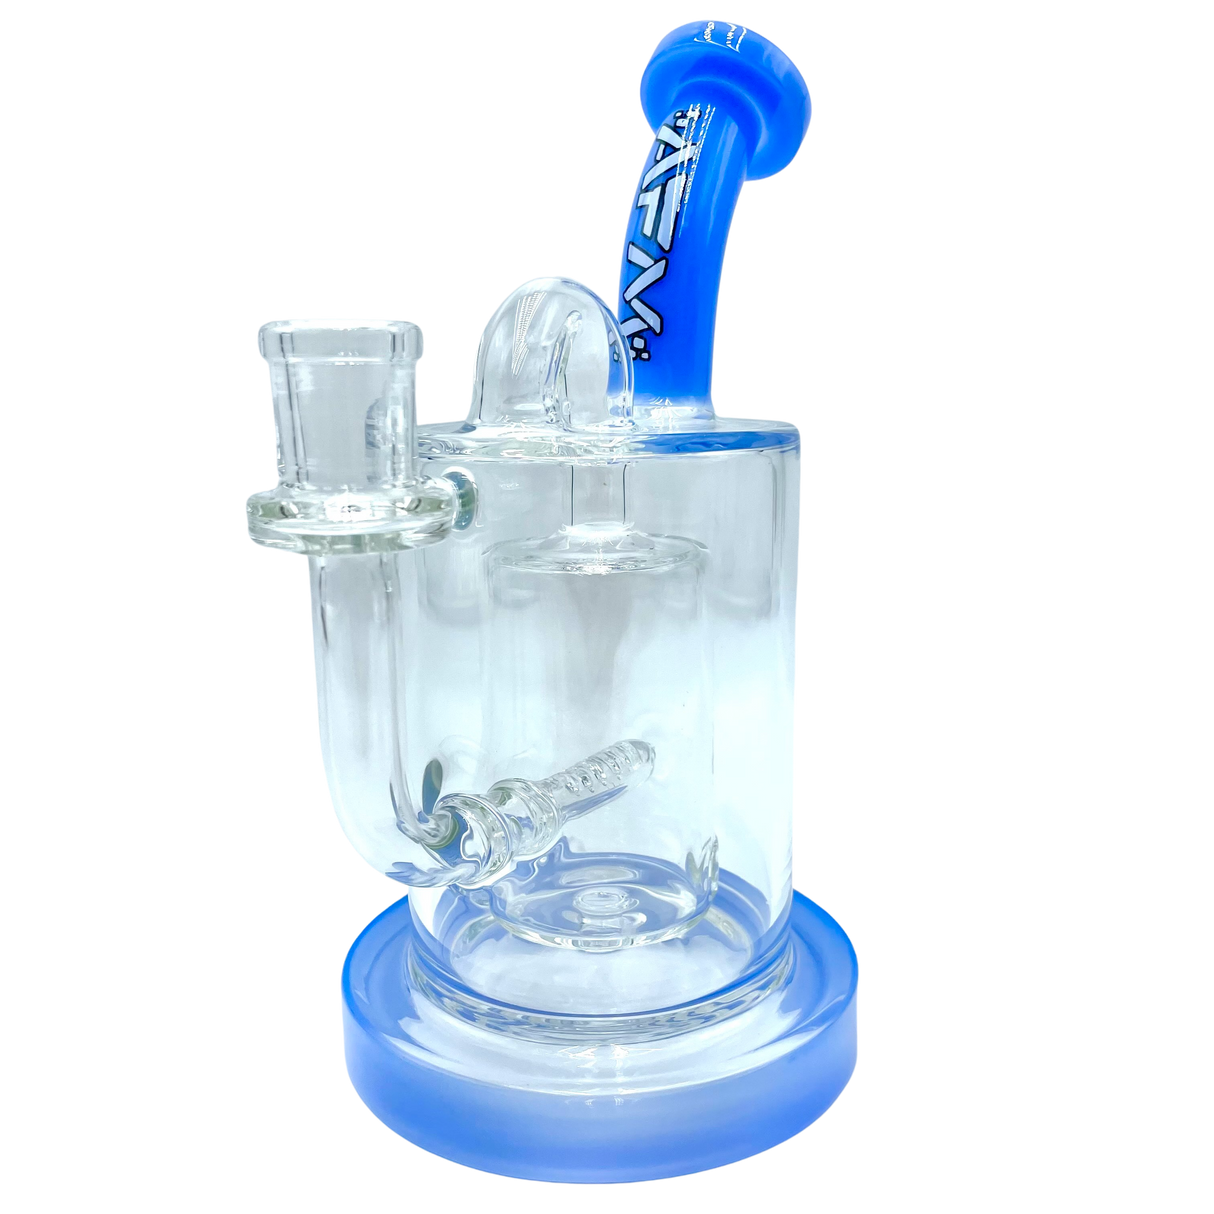 AFM The Pump Recycler 8" Dab Rig in Jade Blue with In-Line Percolator, Front View on White Background